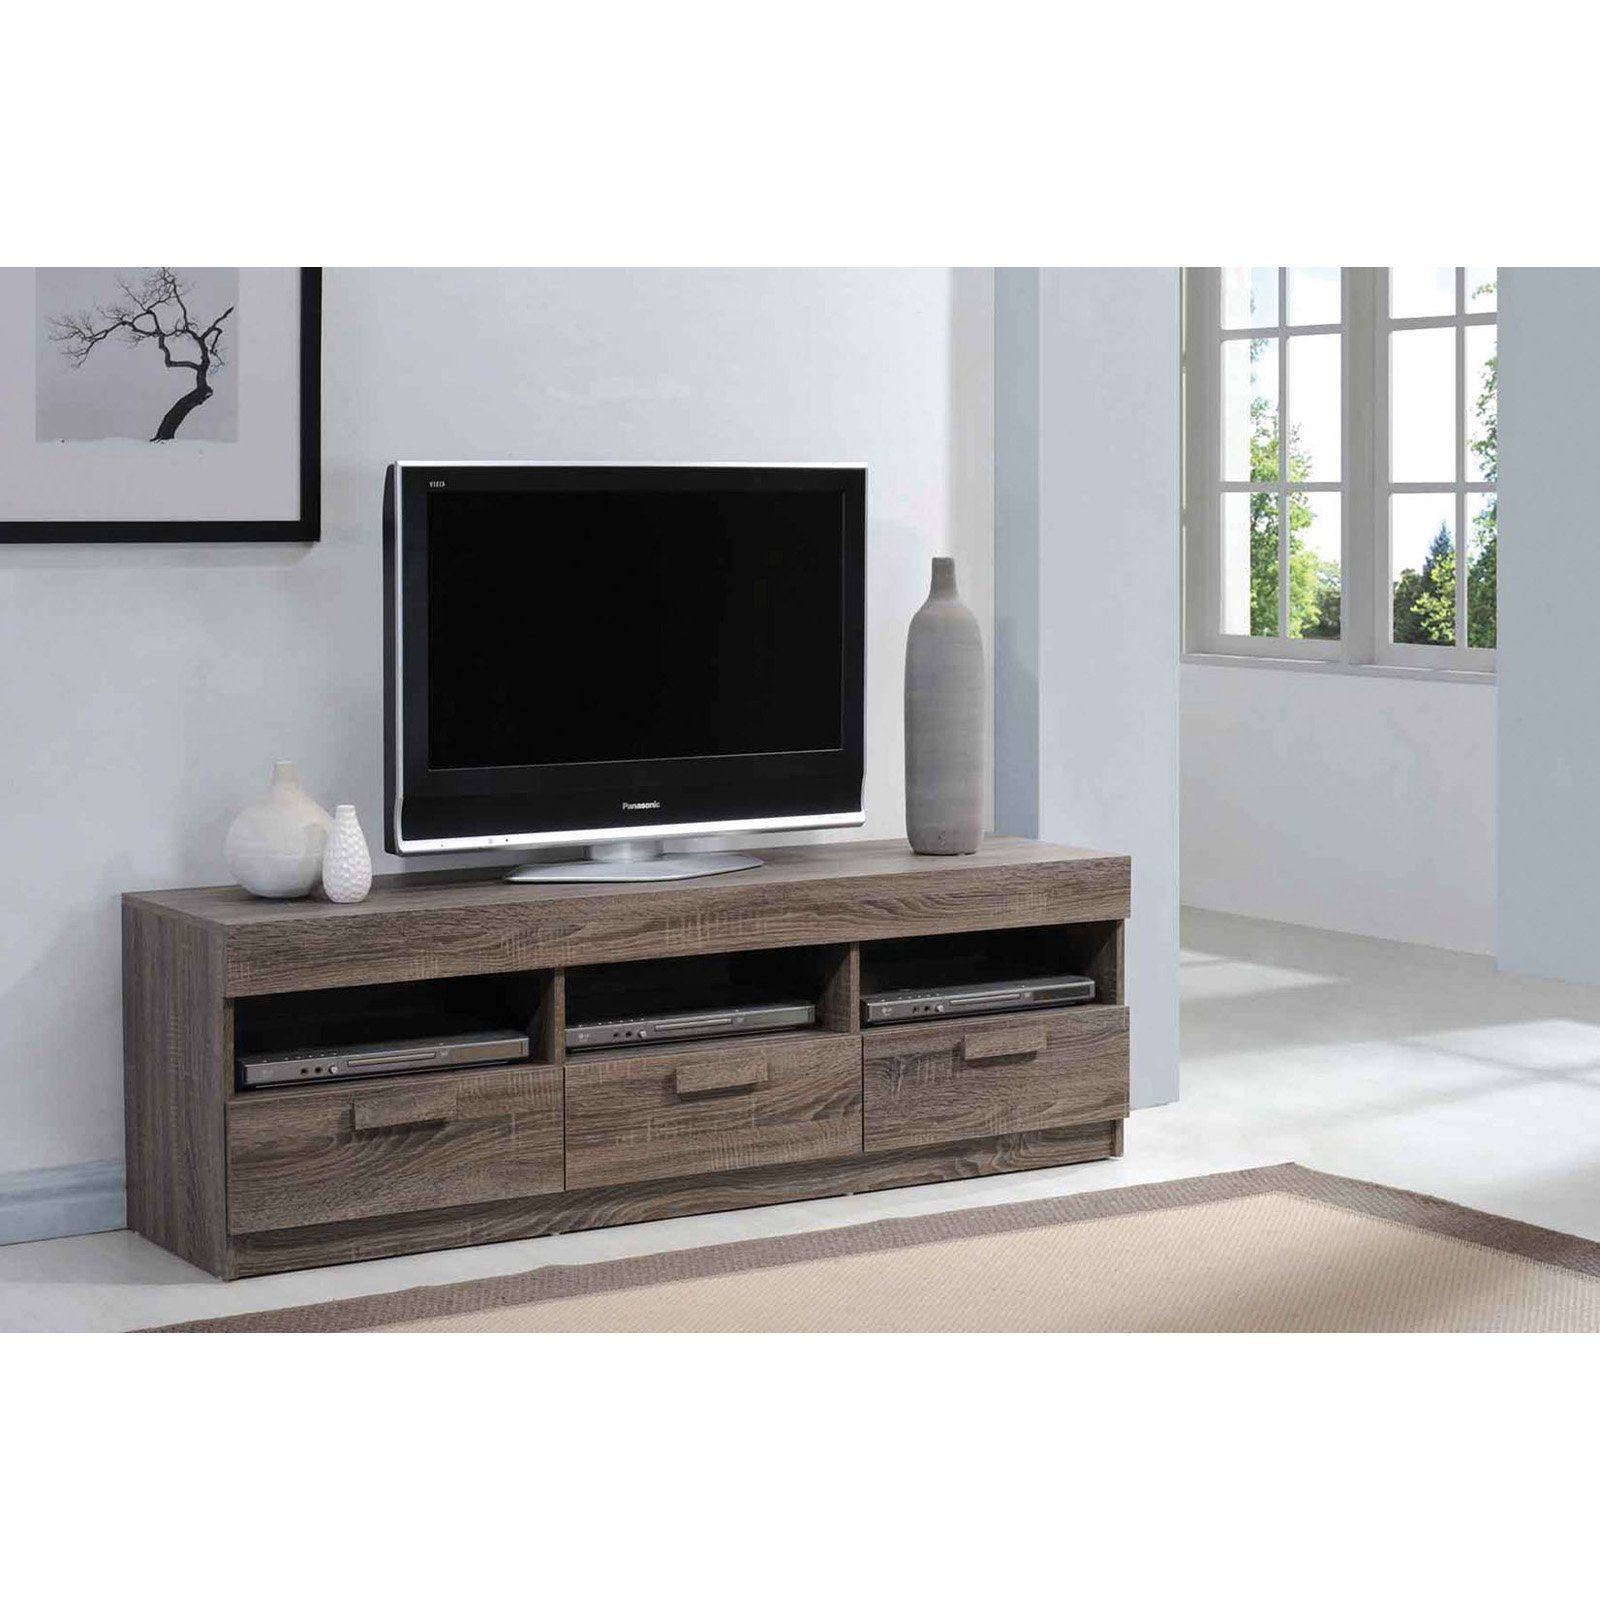 Acme Alvin Rustic Oak Tv Stand For Flat Screen Tvs Up To With Ahana Tv Stands For Tvs Up To 60" (View 7 of 15)